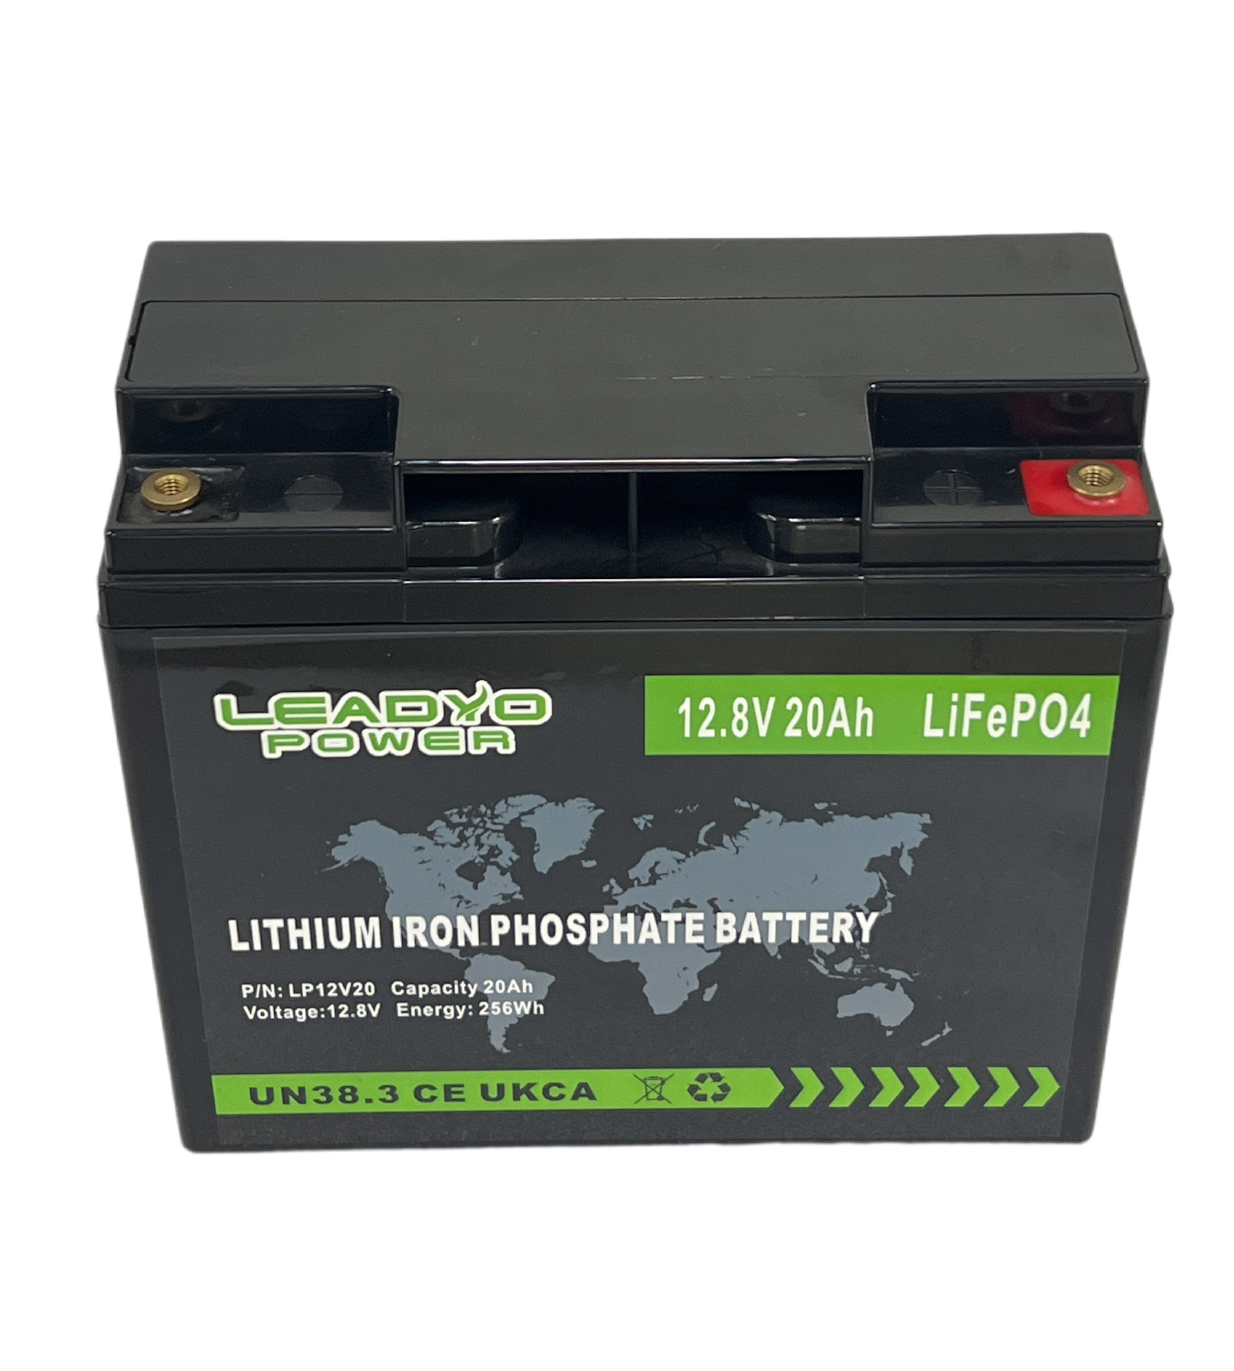 Experience Long-Lasting Power with Leadyo's LiFePO4 Battery Packs